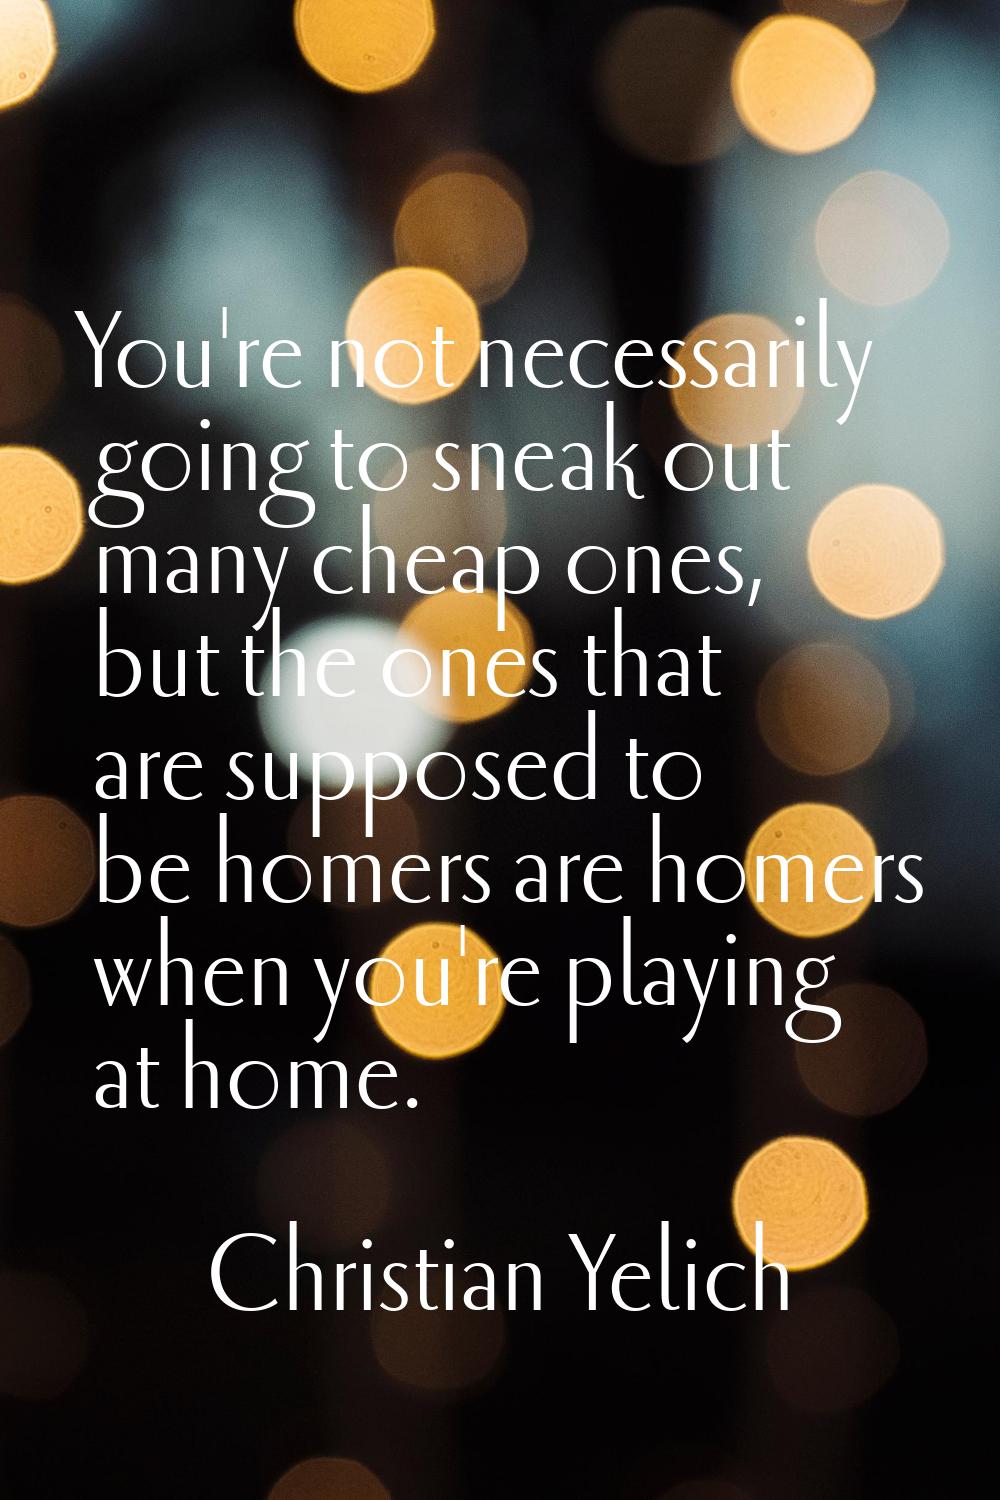 You're not necessarily going to sneak out many cheap ones, but the ones that are supposed to be hom